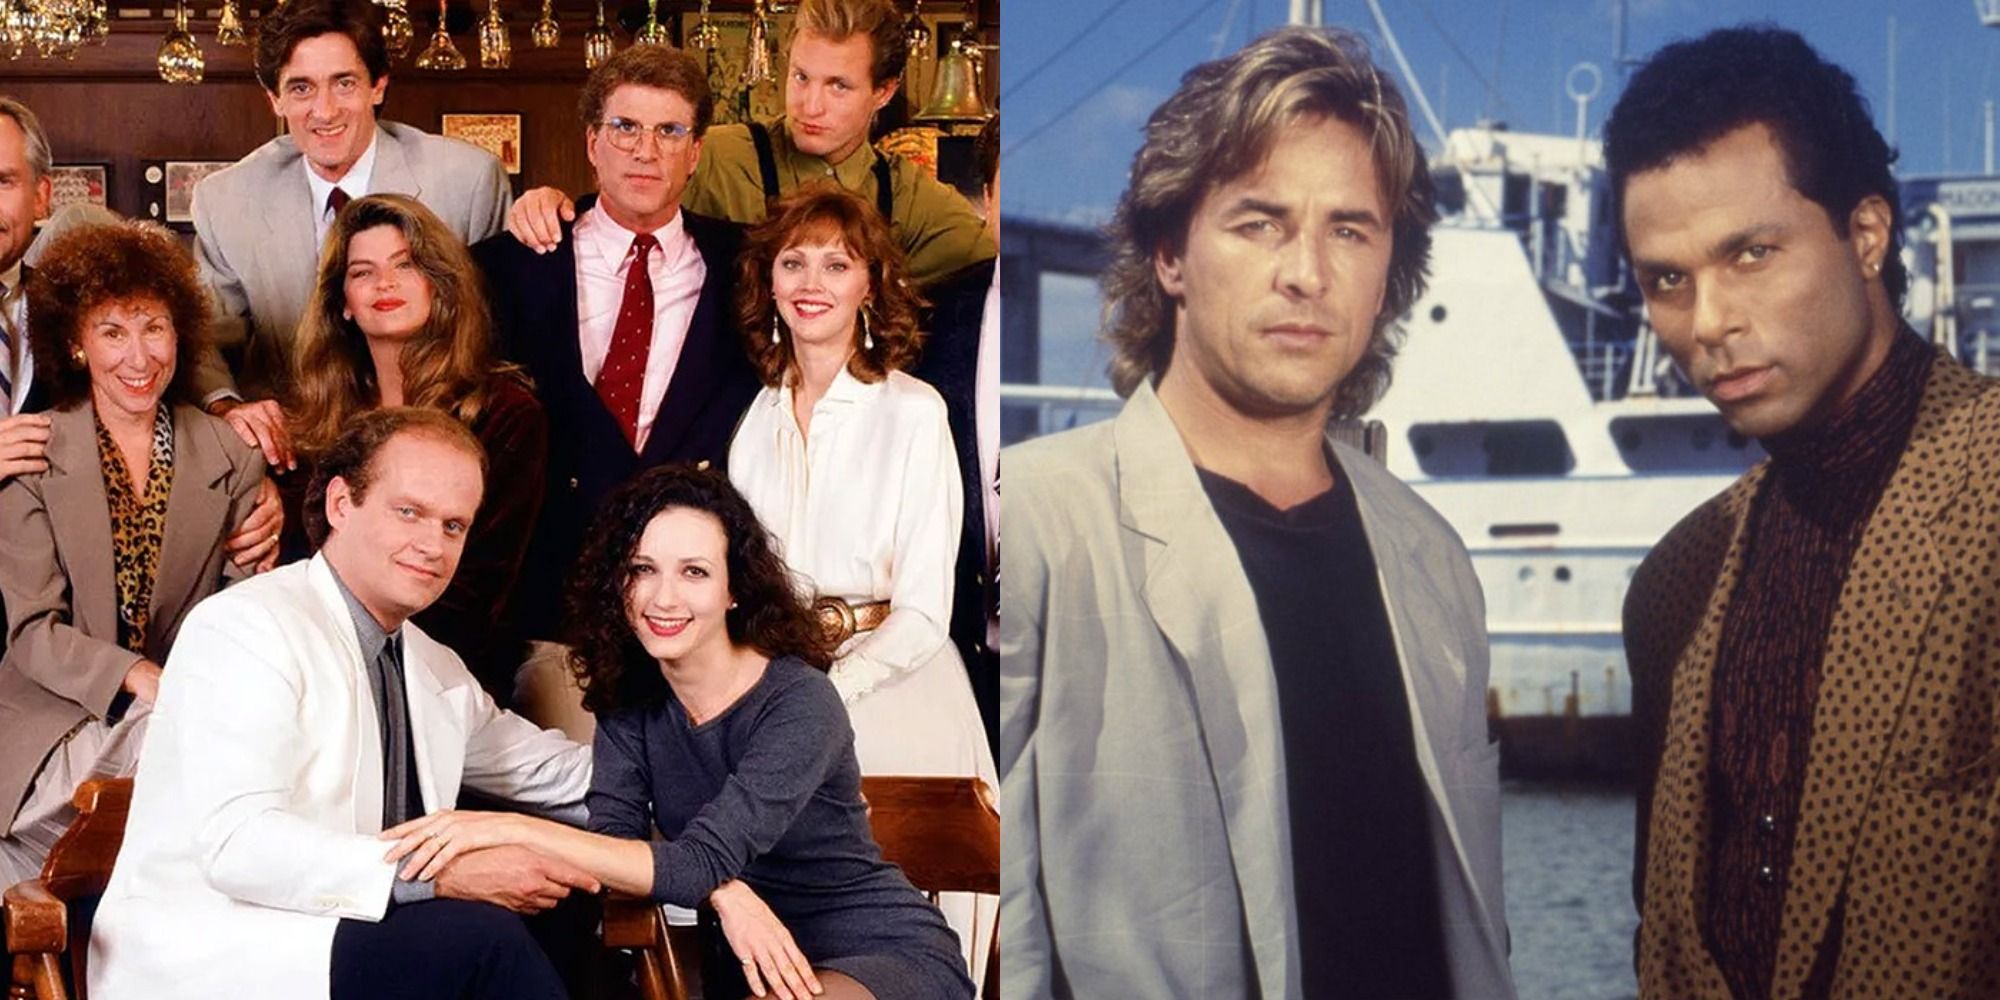 The cast of Cheers and the cast of Miami Vice